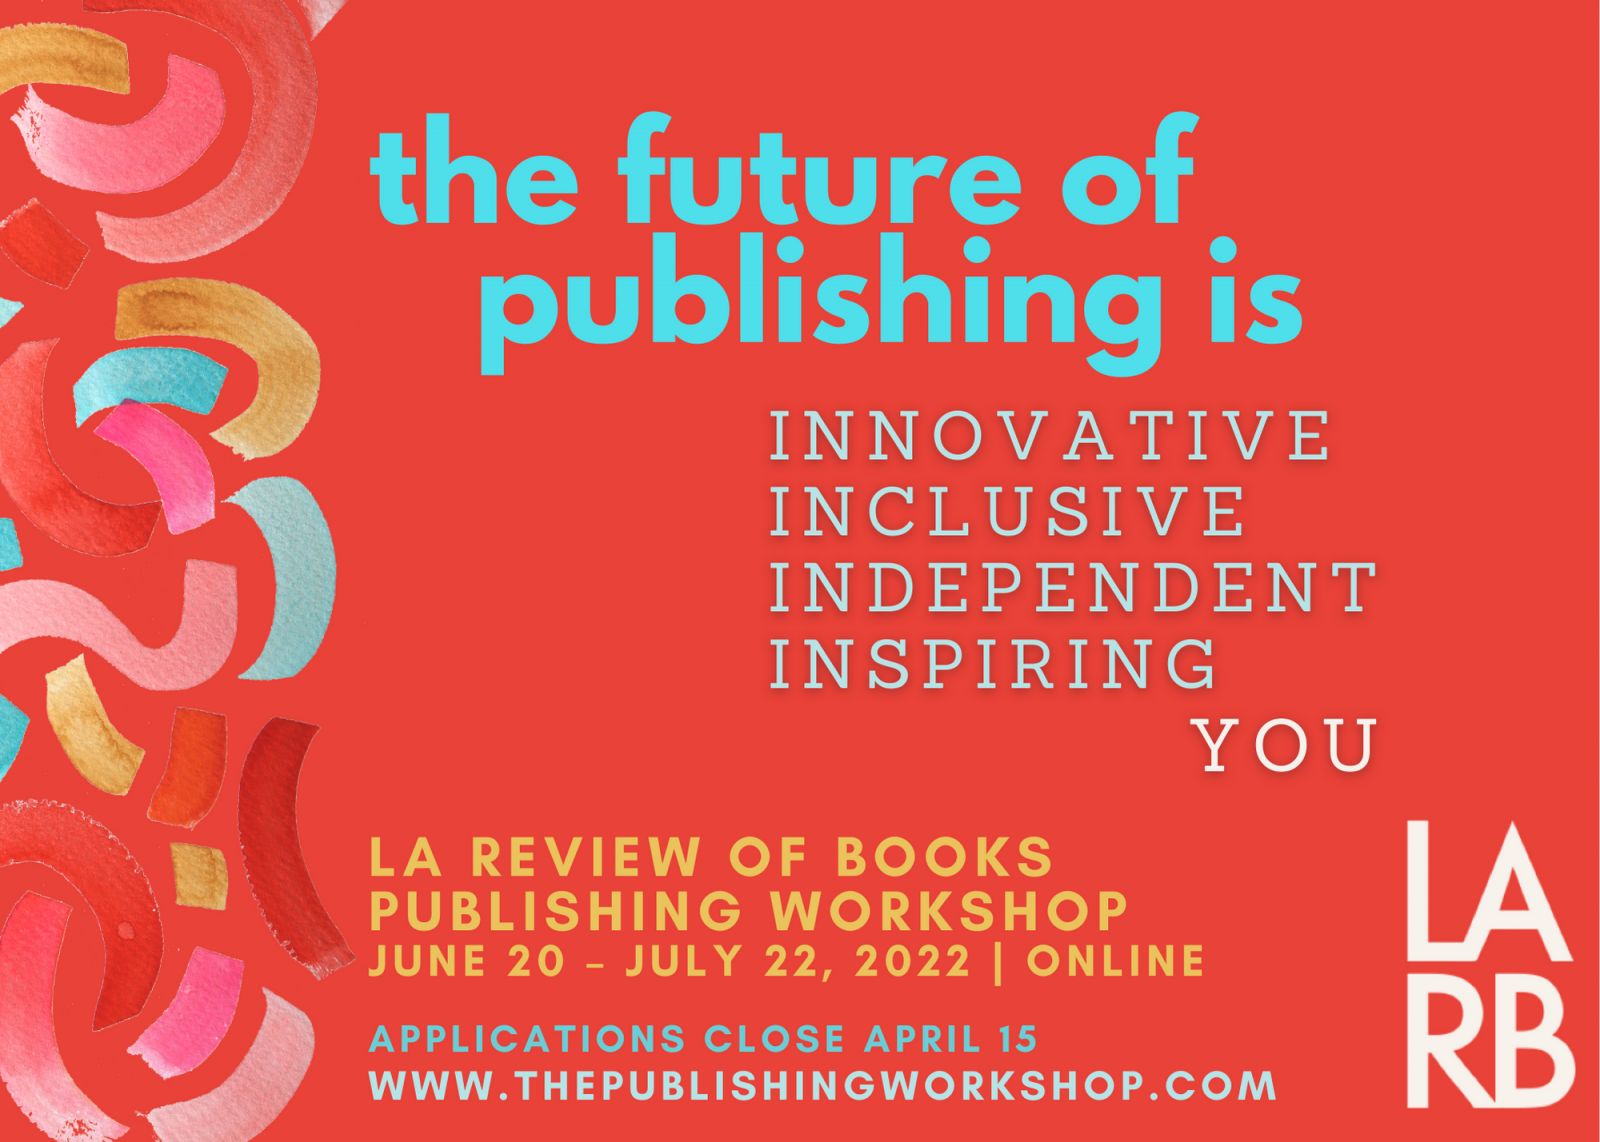 Publicity image that states: The future of publishing is: Innovative, Inclusive, Independent, Inspiring, You. LA Review of Books Publishing Workshop, June 20-July 22, 2022, Online. Applications Close April 15. www.thepublishingworkshop.com.